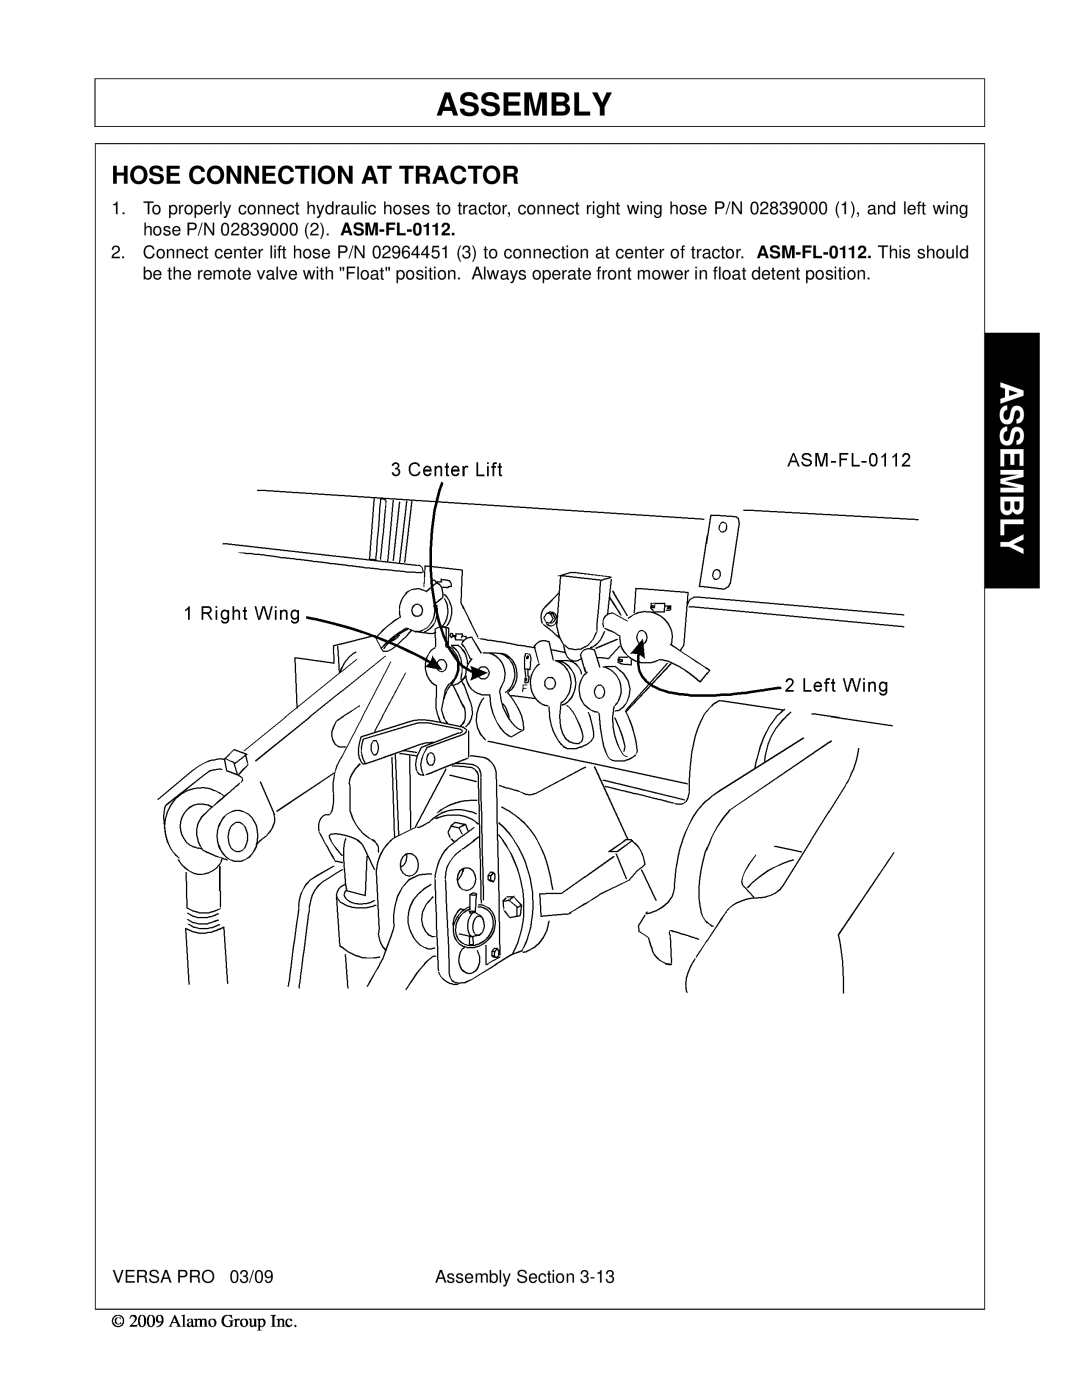 Alamo 803350C manual Hose Connection At Tractor, Assembly 